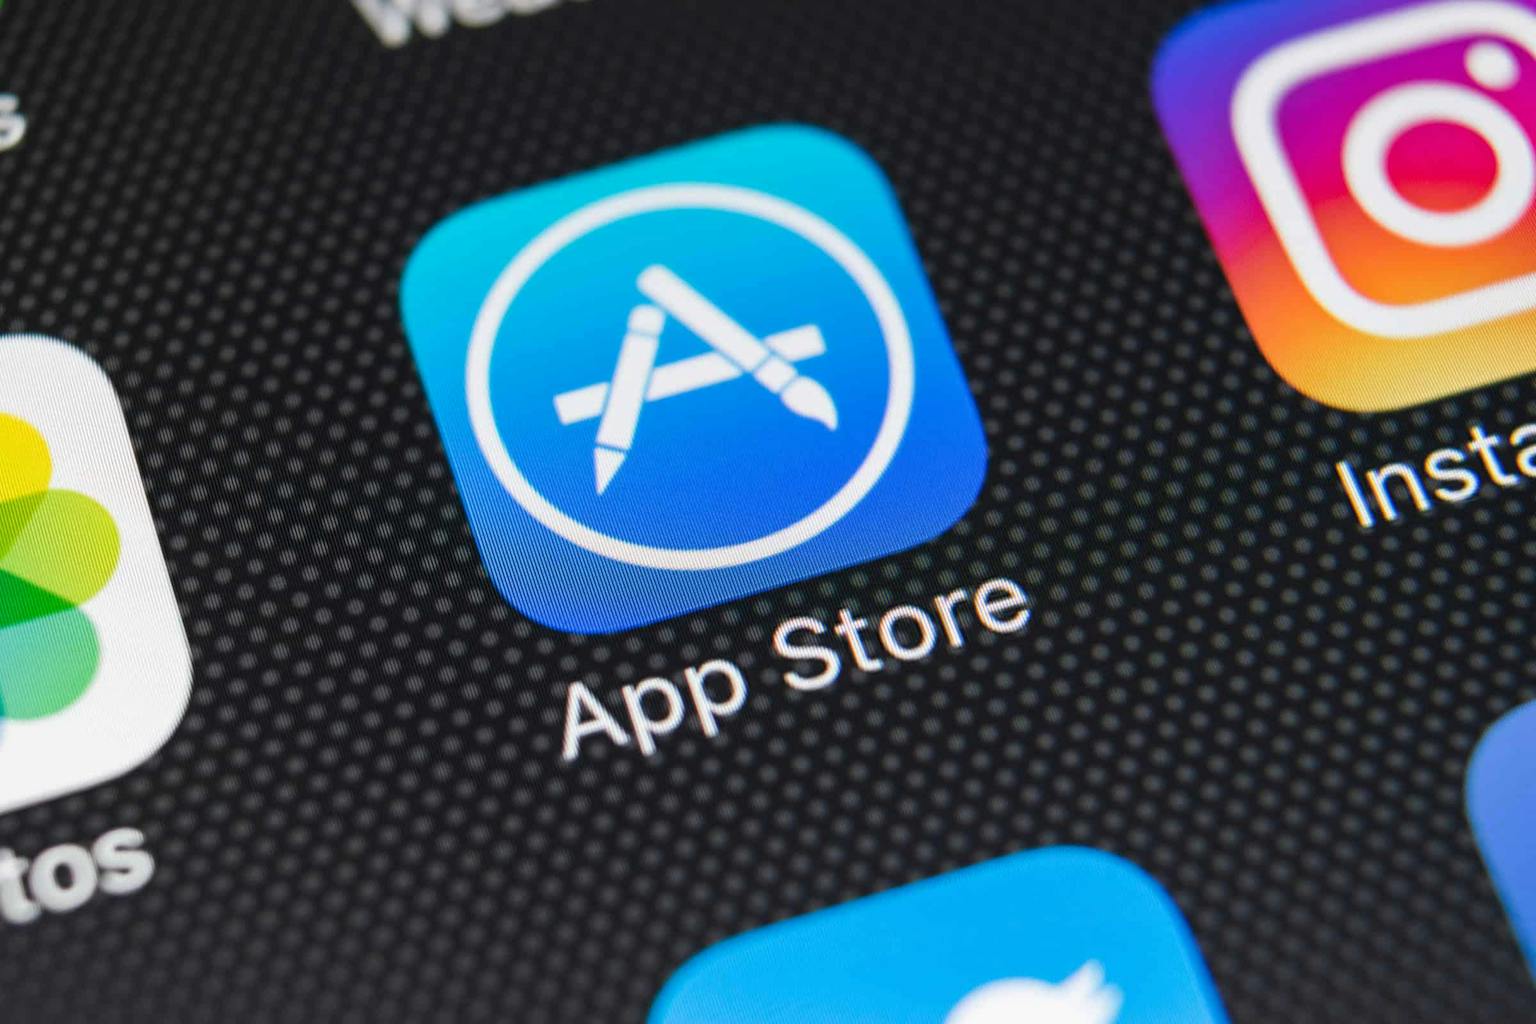 Review guidelines are important for the Apple App Store